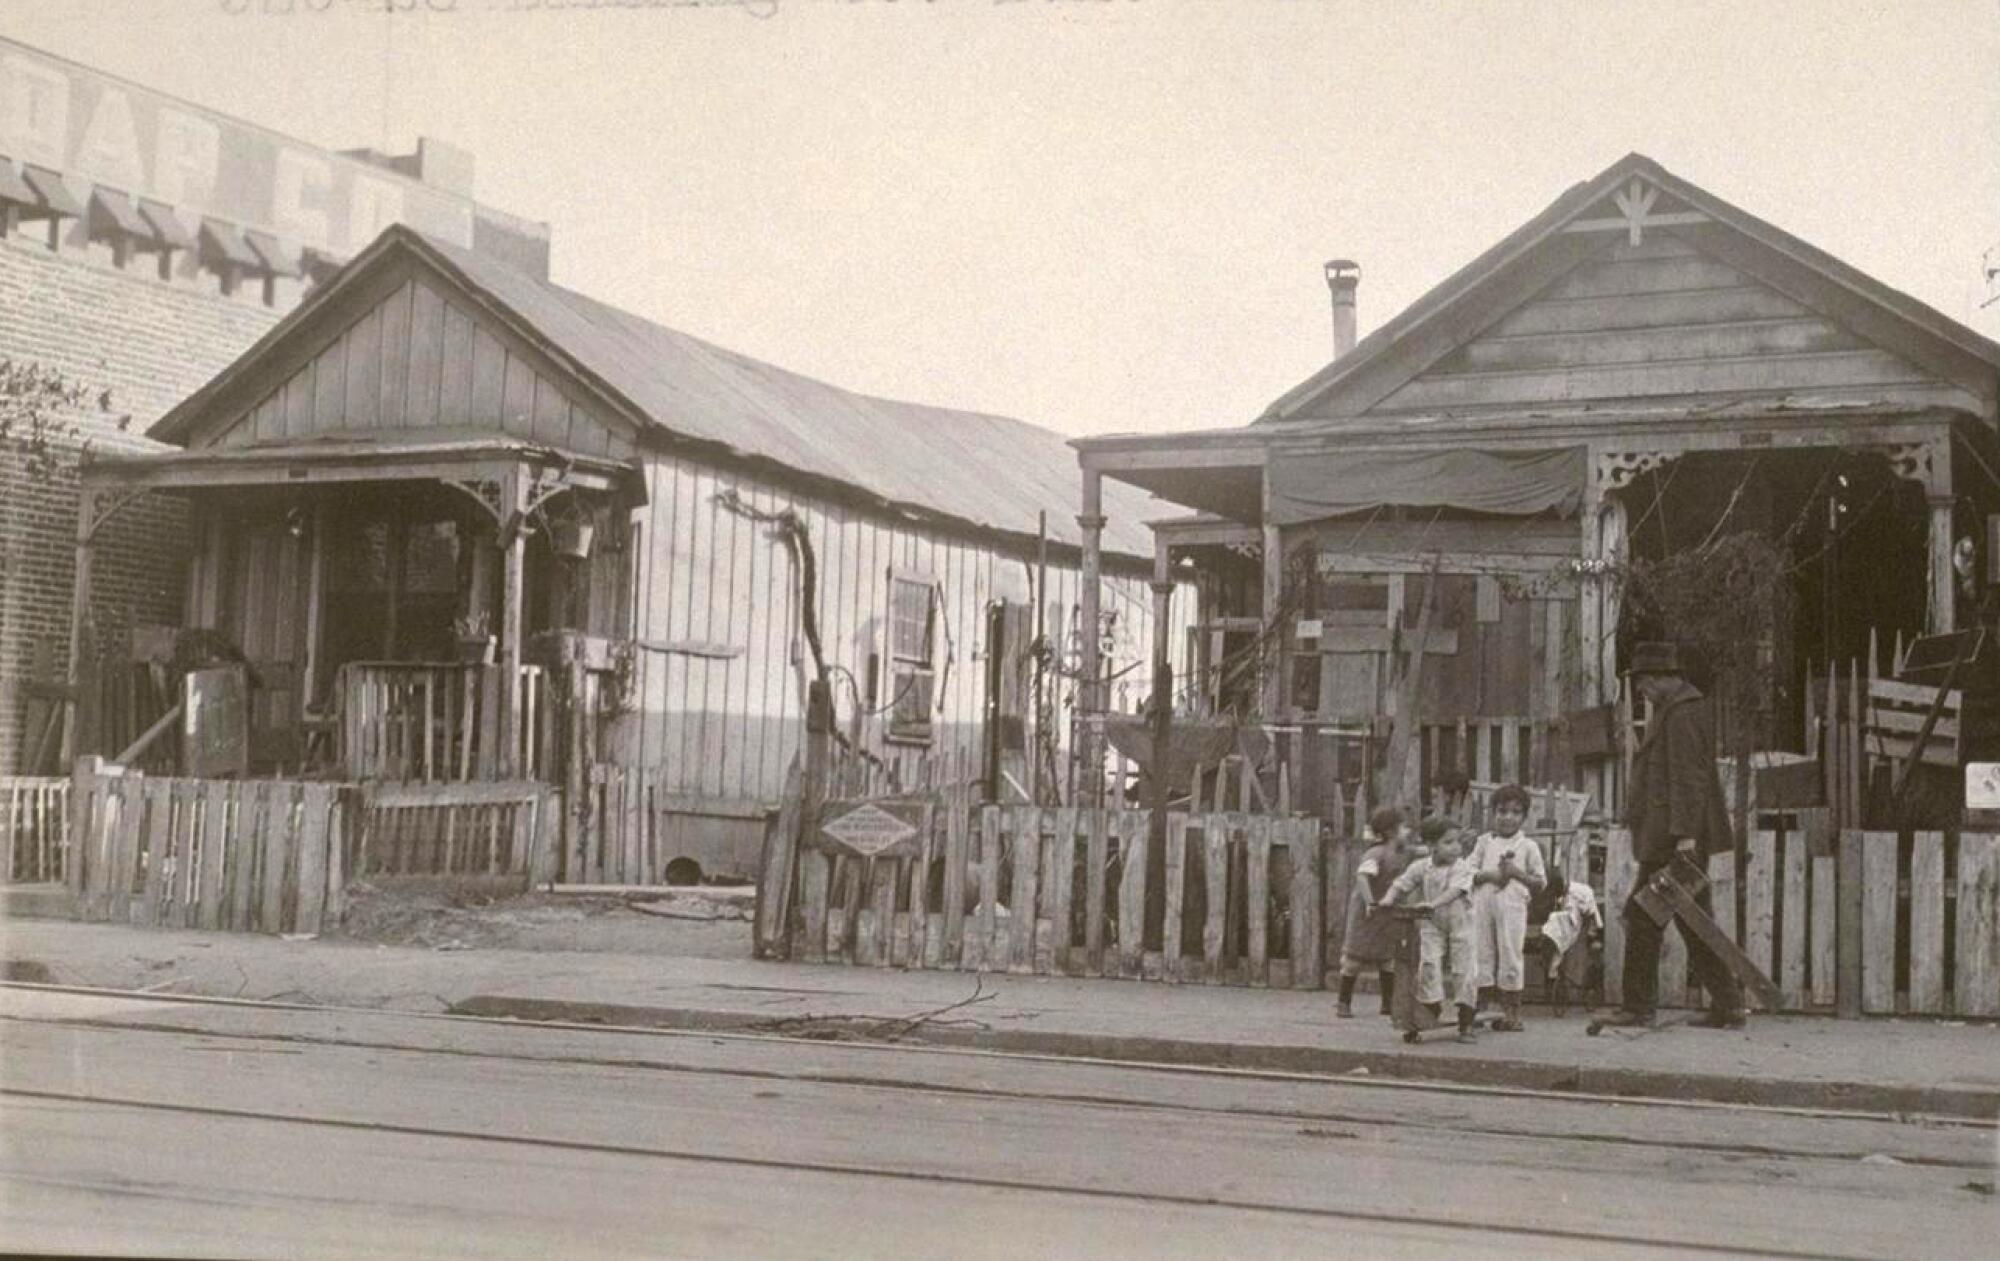 A 1924 archival image shows two wooden homes on a street with kids standing outside.